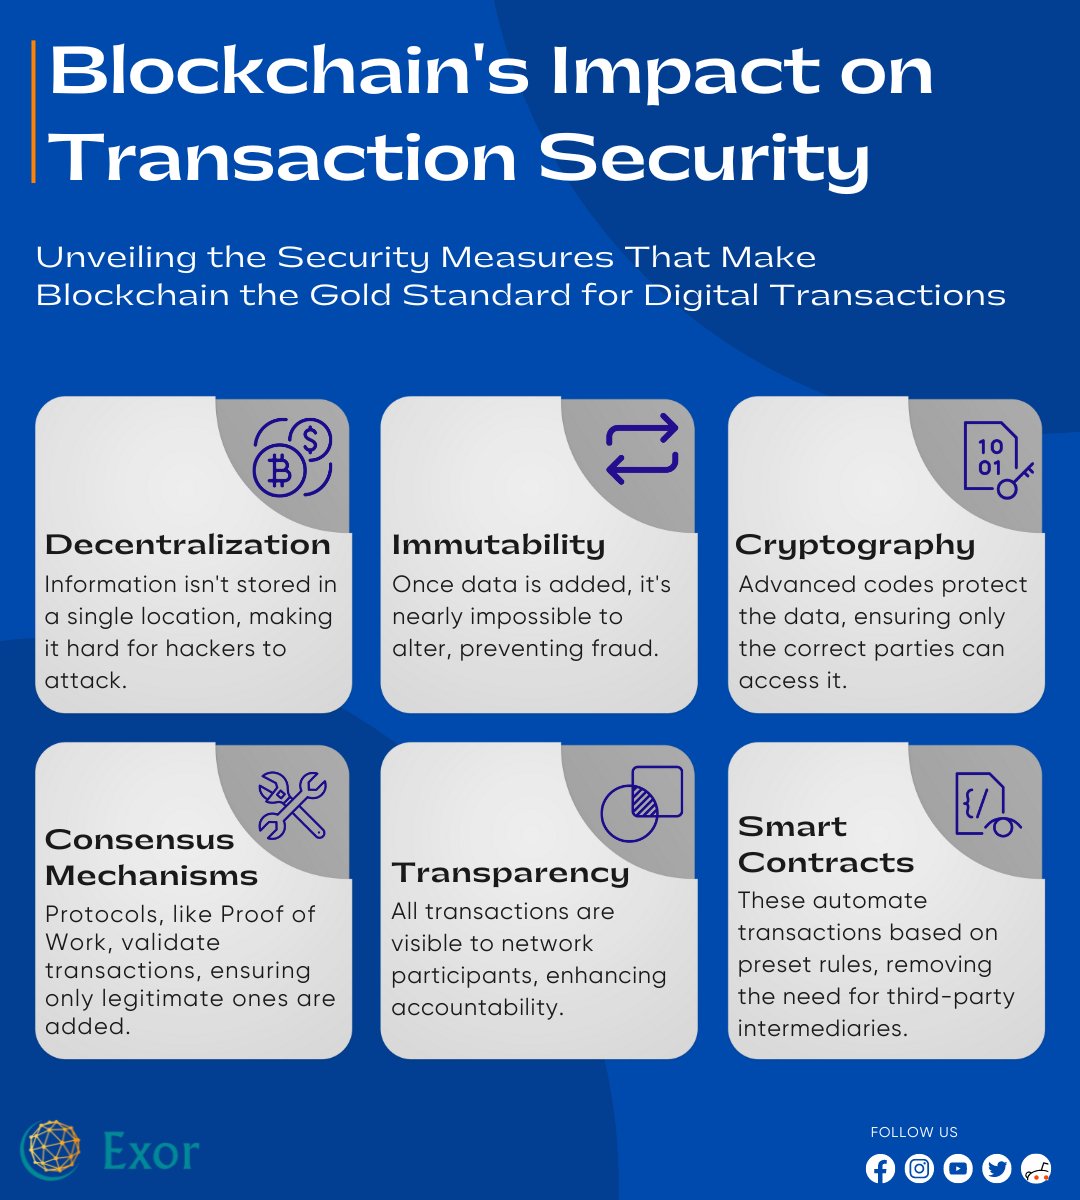 Explore how blockchain revolutionizes transaction security. Immutability, decentralized consensus, and cryptographic protection ensure safe and transparent transactions. Discover blockchain's transformative impact with Exor Company. 

#BlockchainSecurity #TransactionSafety